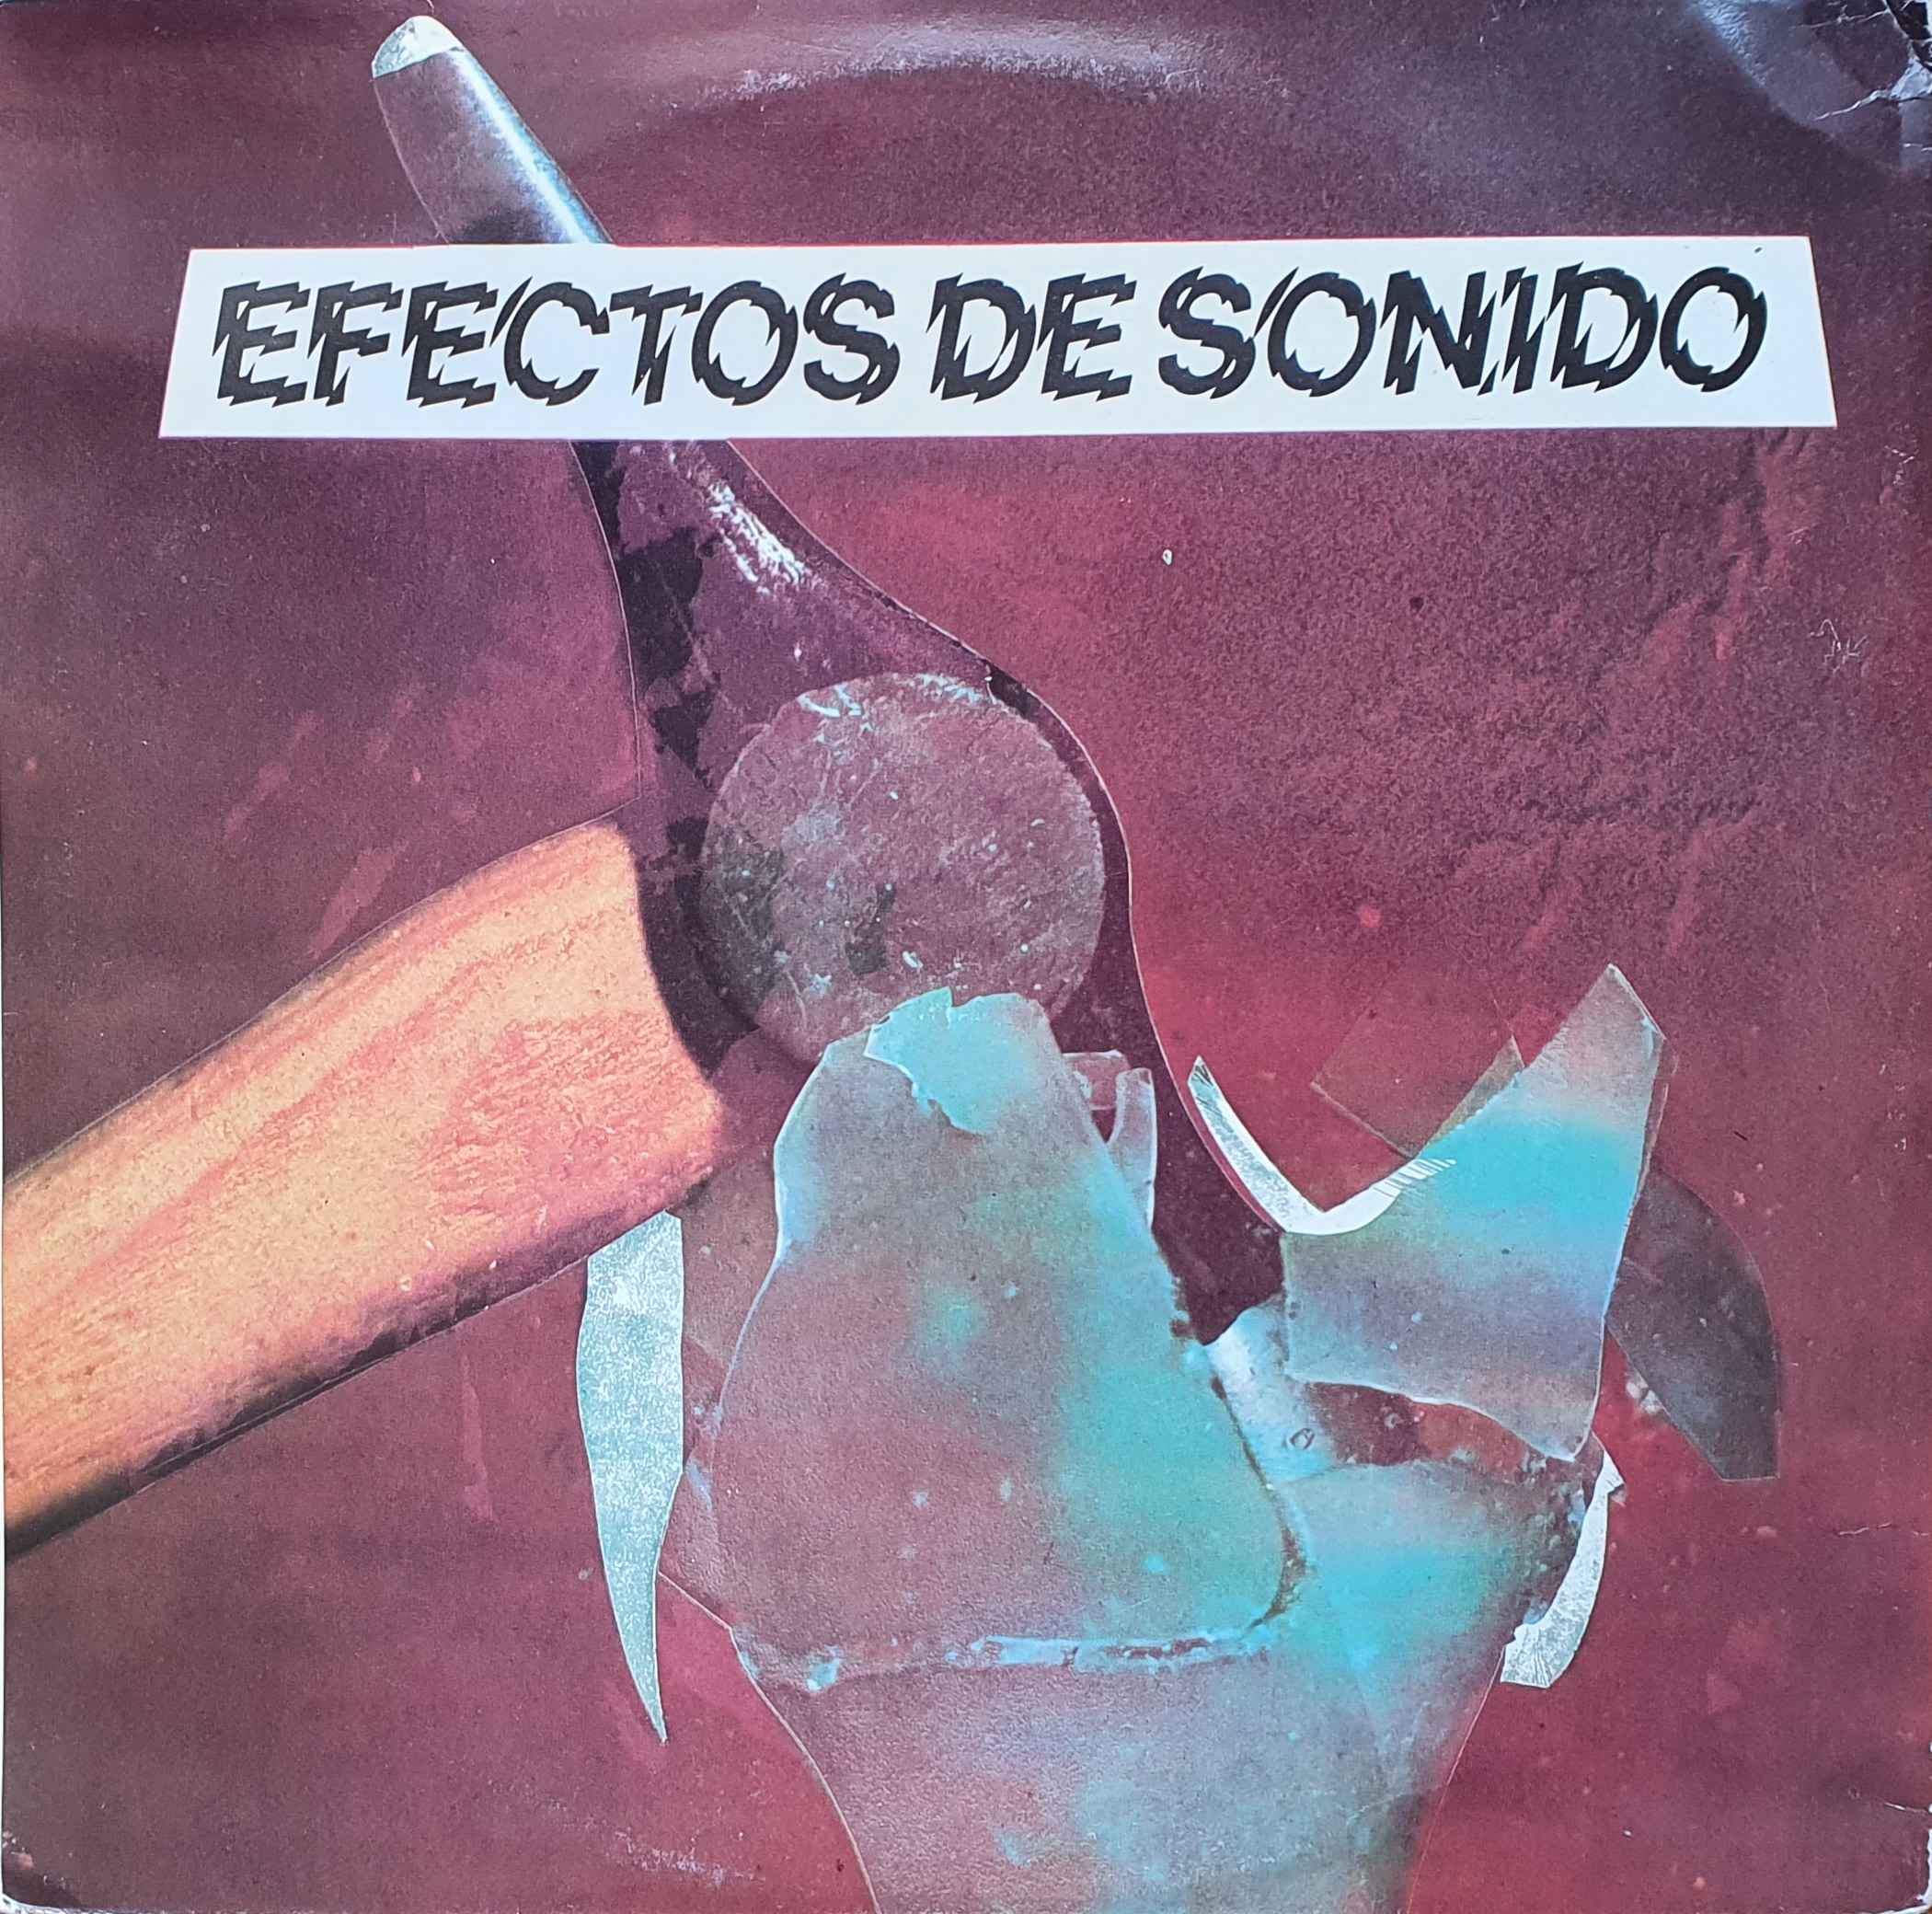 Picture of 55.301 Efectos De Sonido Ciencia Ficcion by artist Various from the BBC records and Tapes library